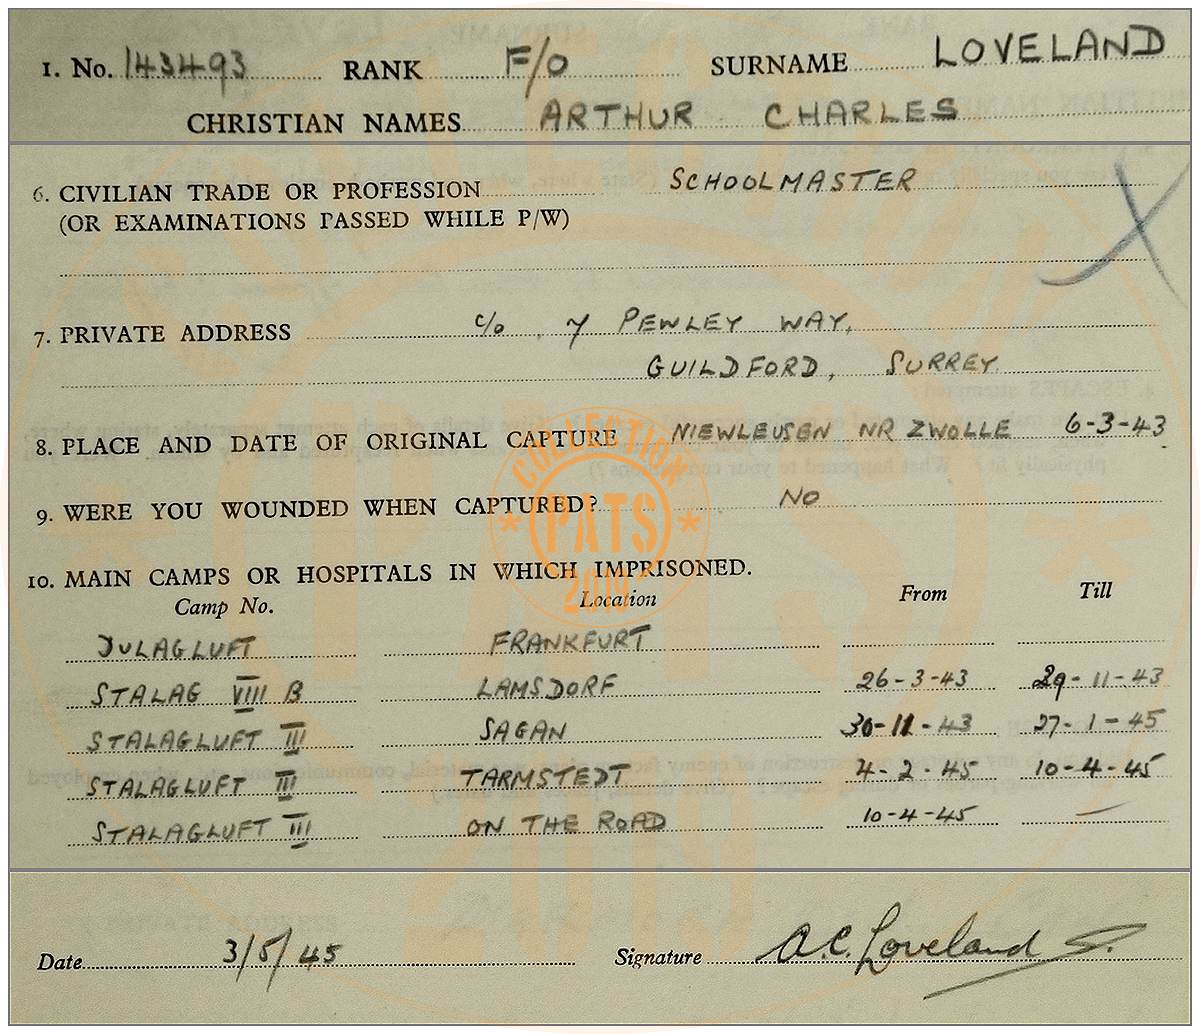 03 May 1945 - M.I.9. interview - Loveland